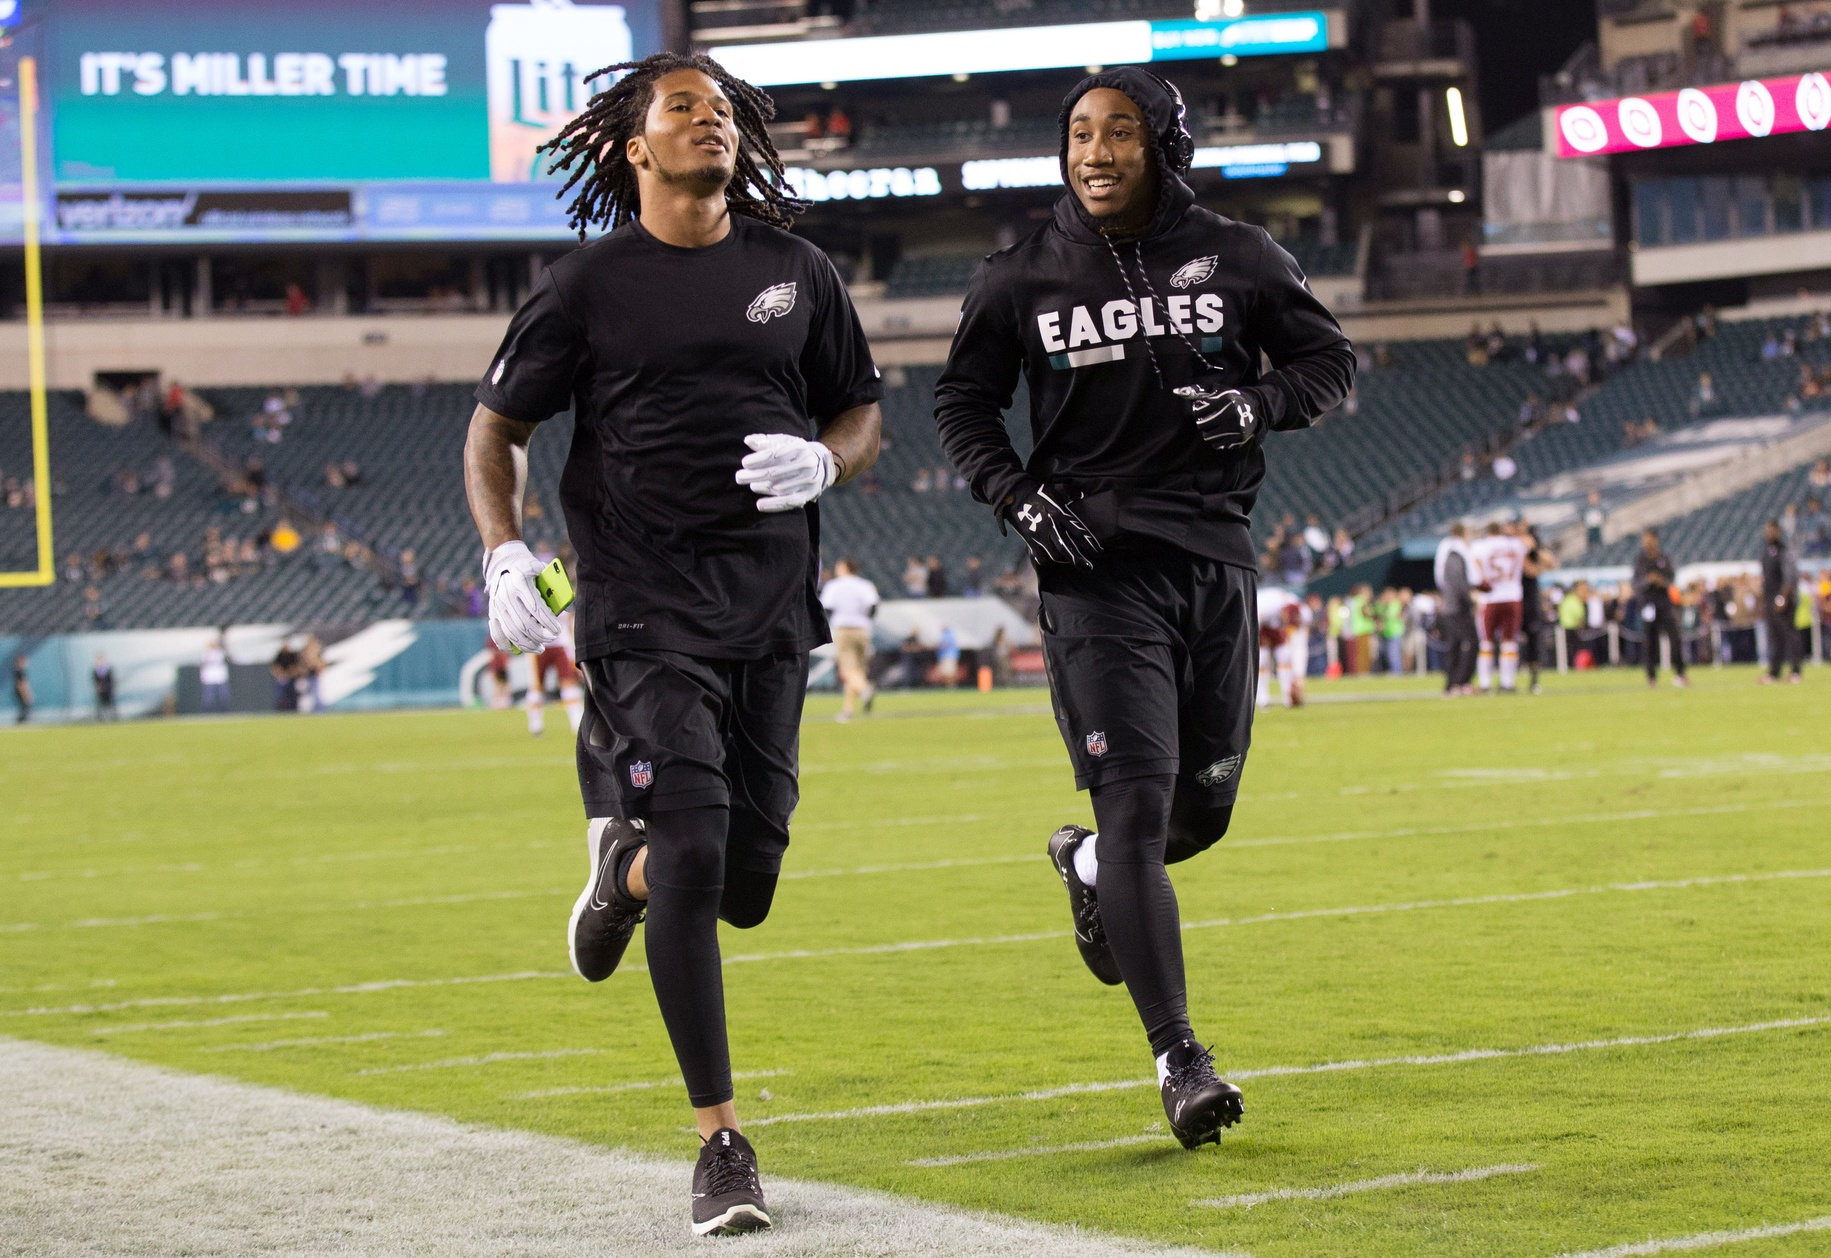 Ronald Darby Returning to the Eagles